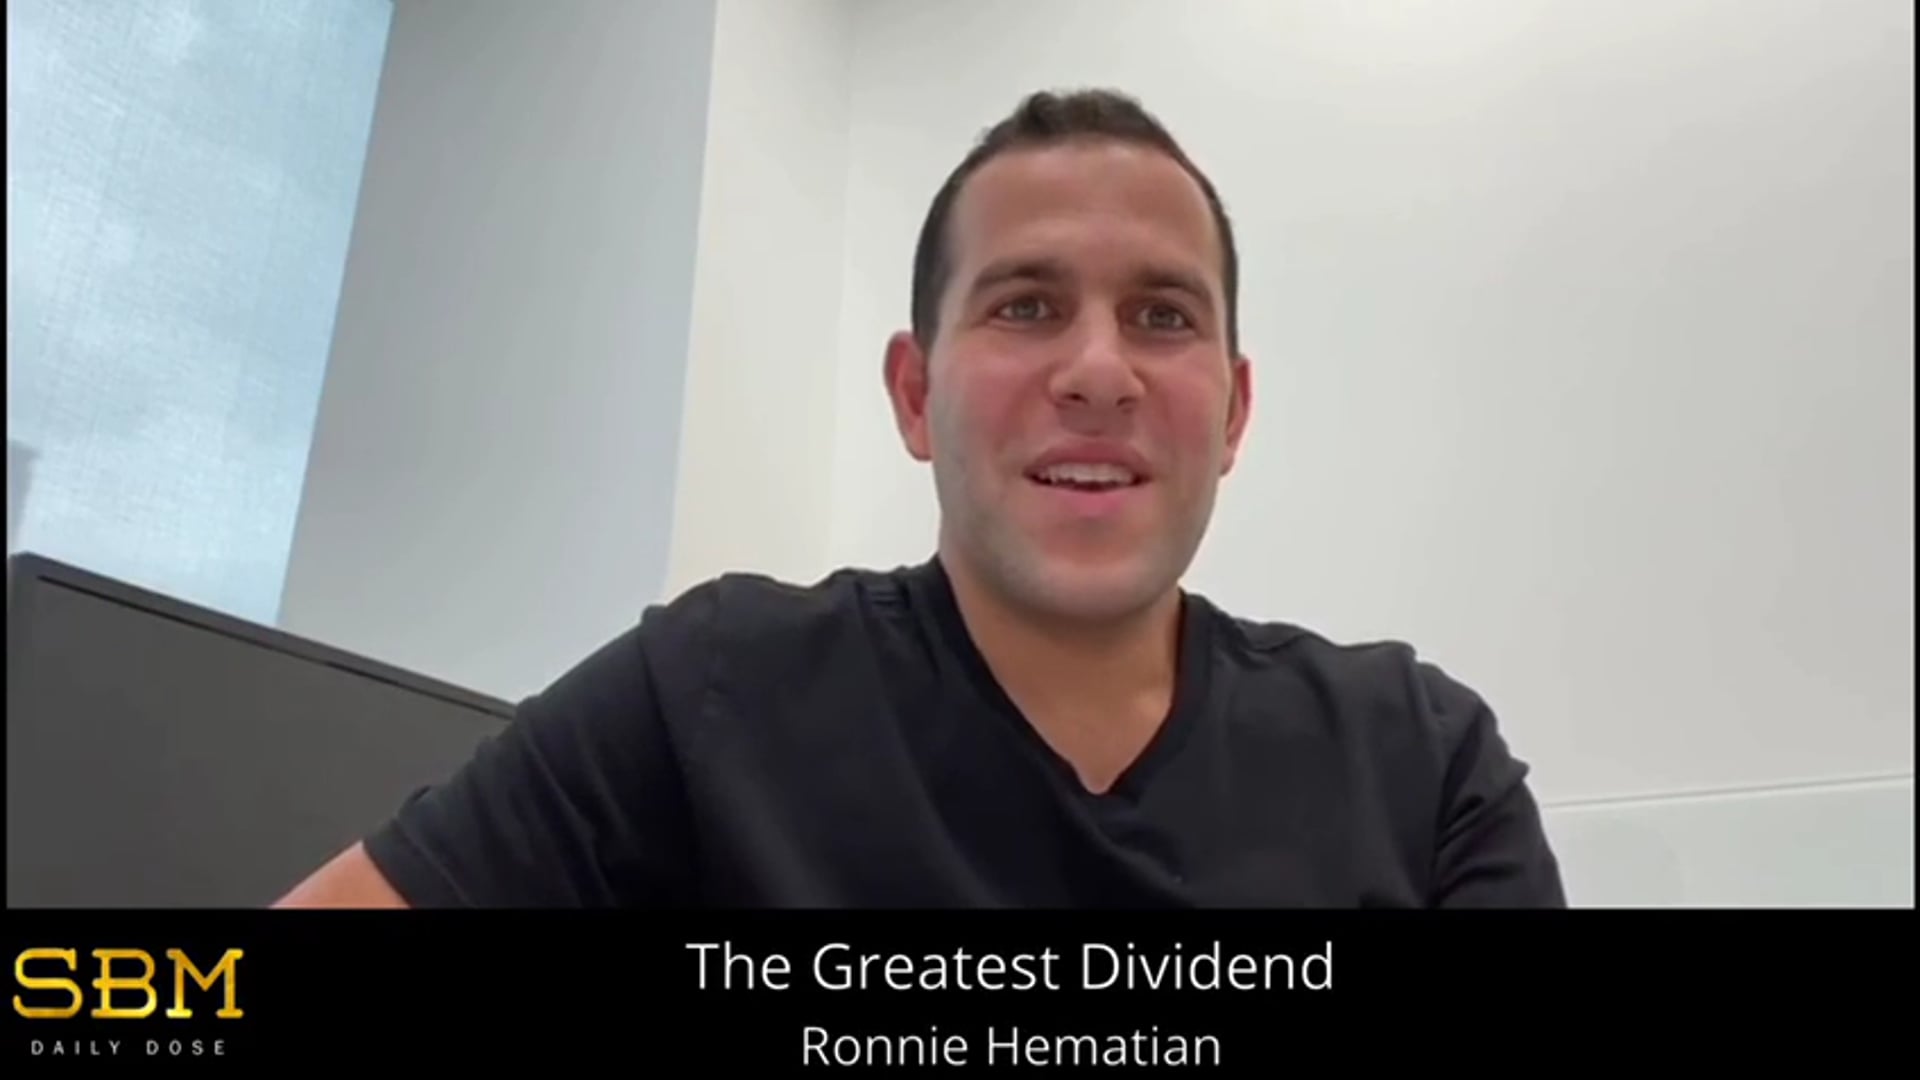 The Greatest Dividend - Ronnie Hematian